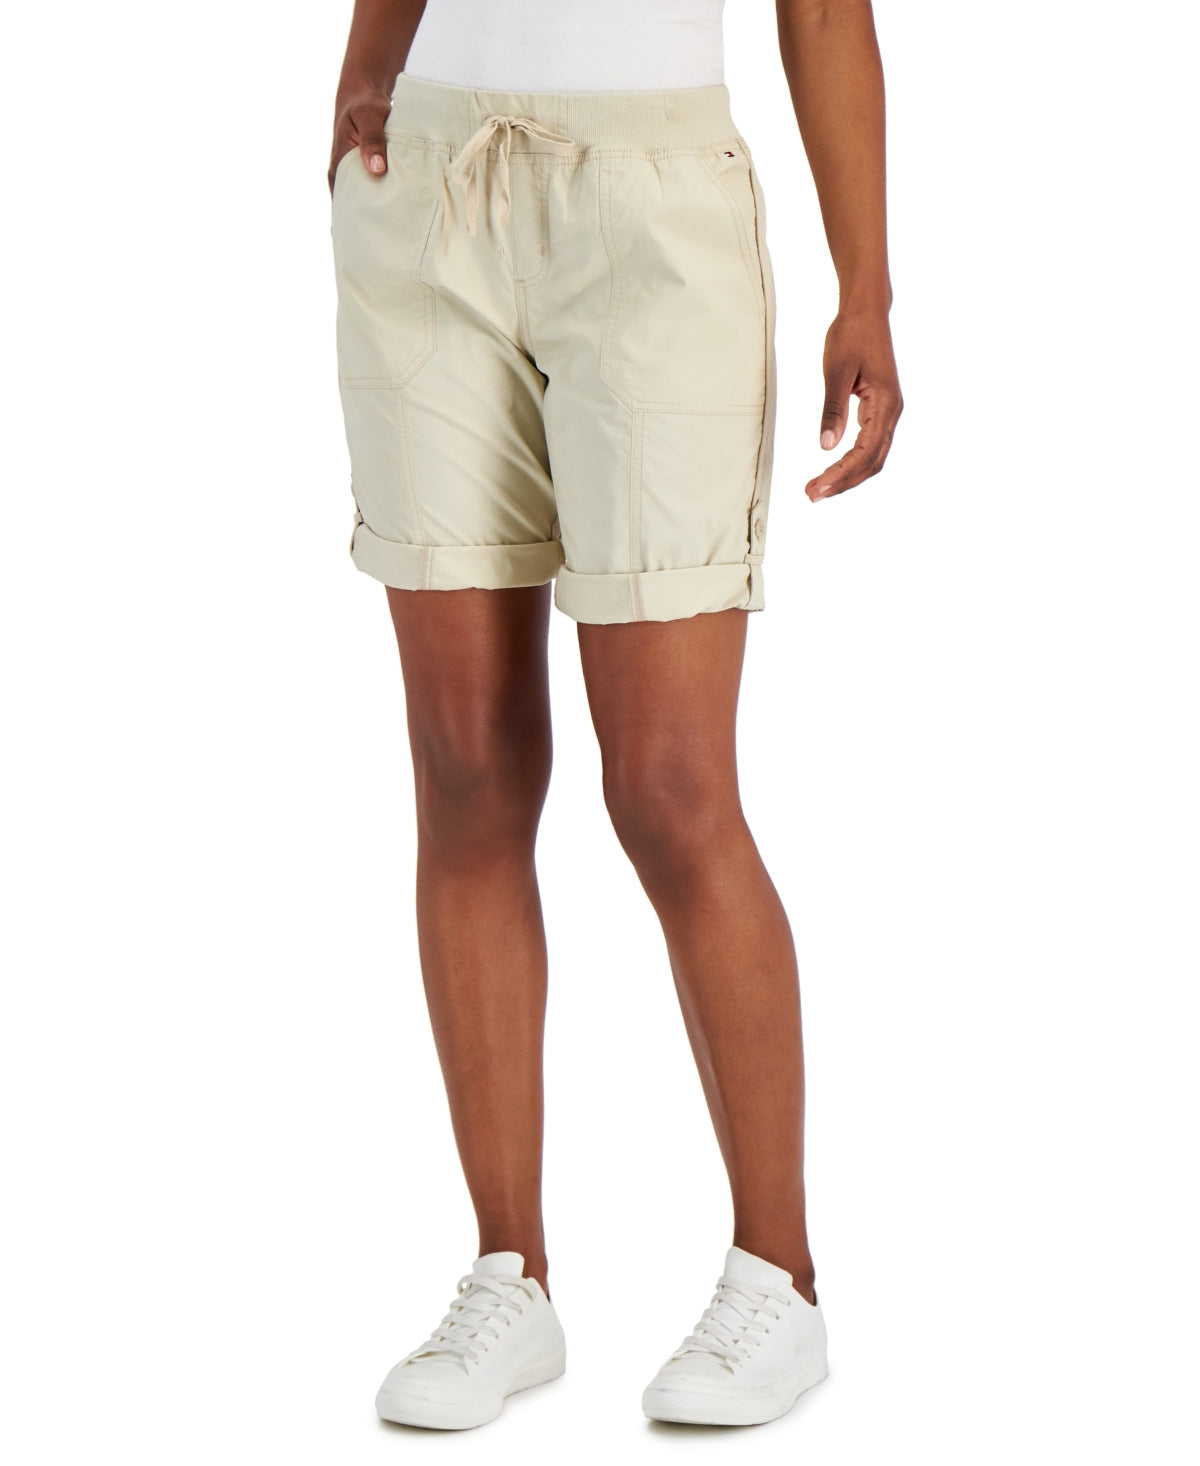 Tommy Hilfiger Women's Rolled Cuff Utility Shorts Brown Size X-Large